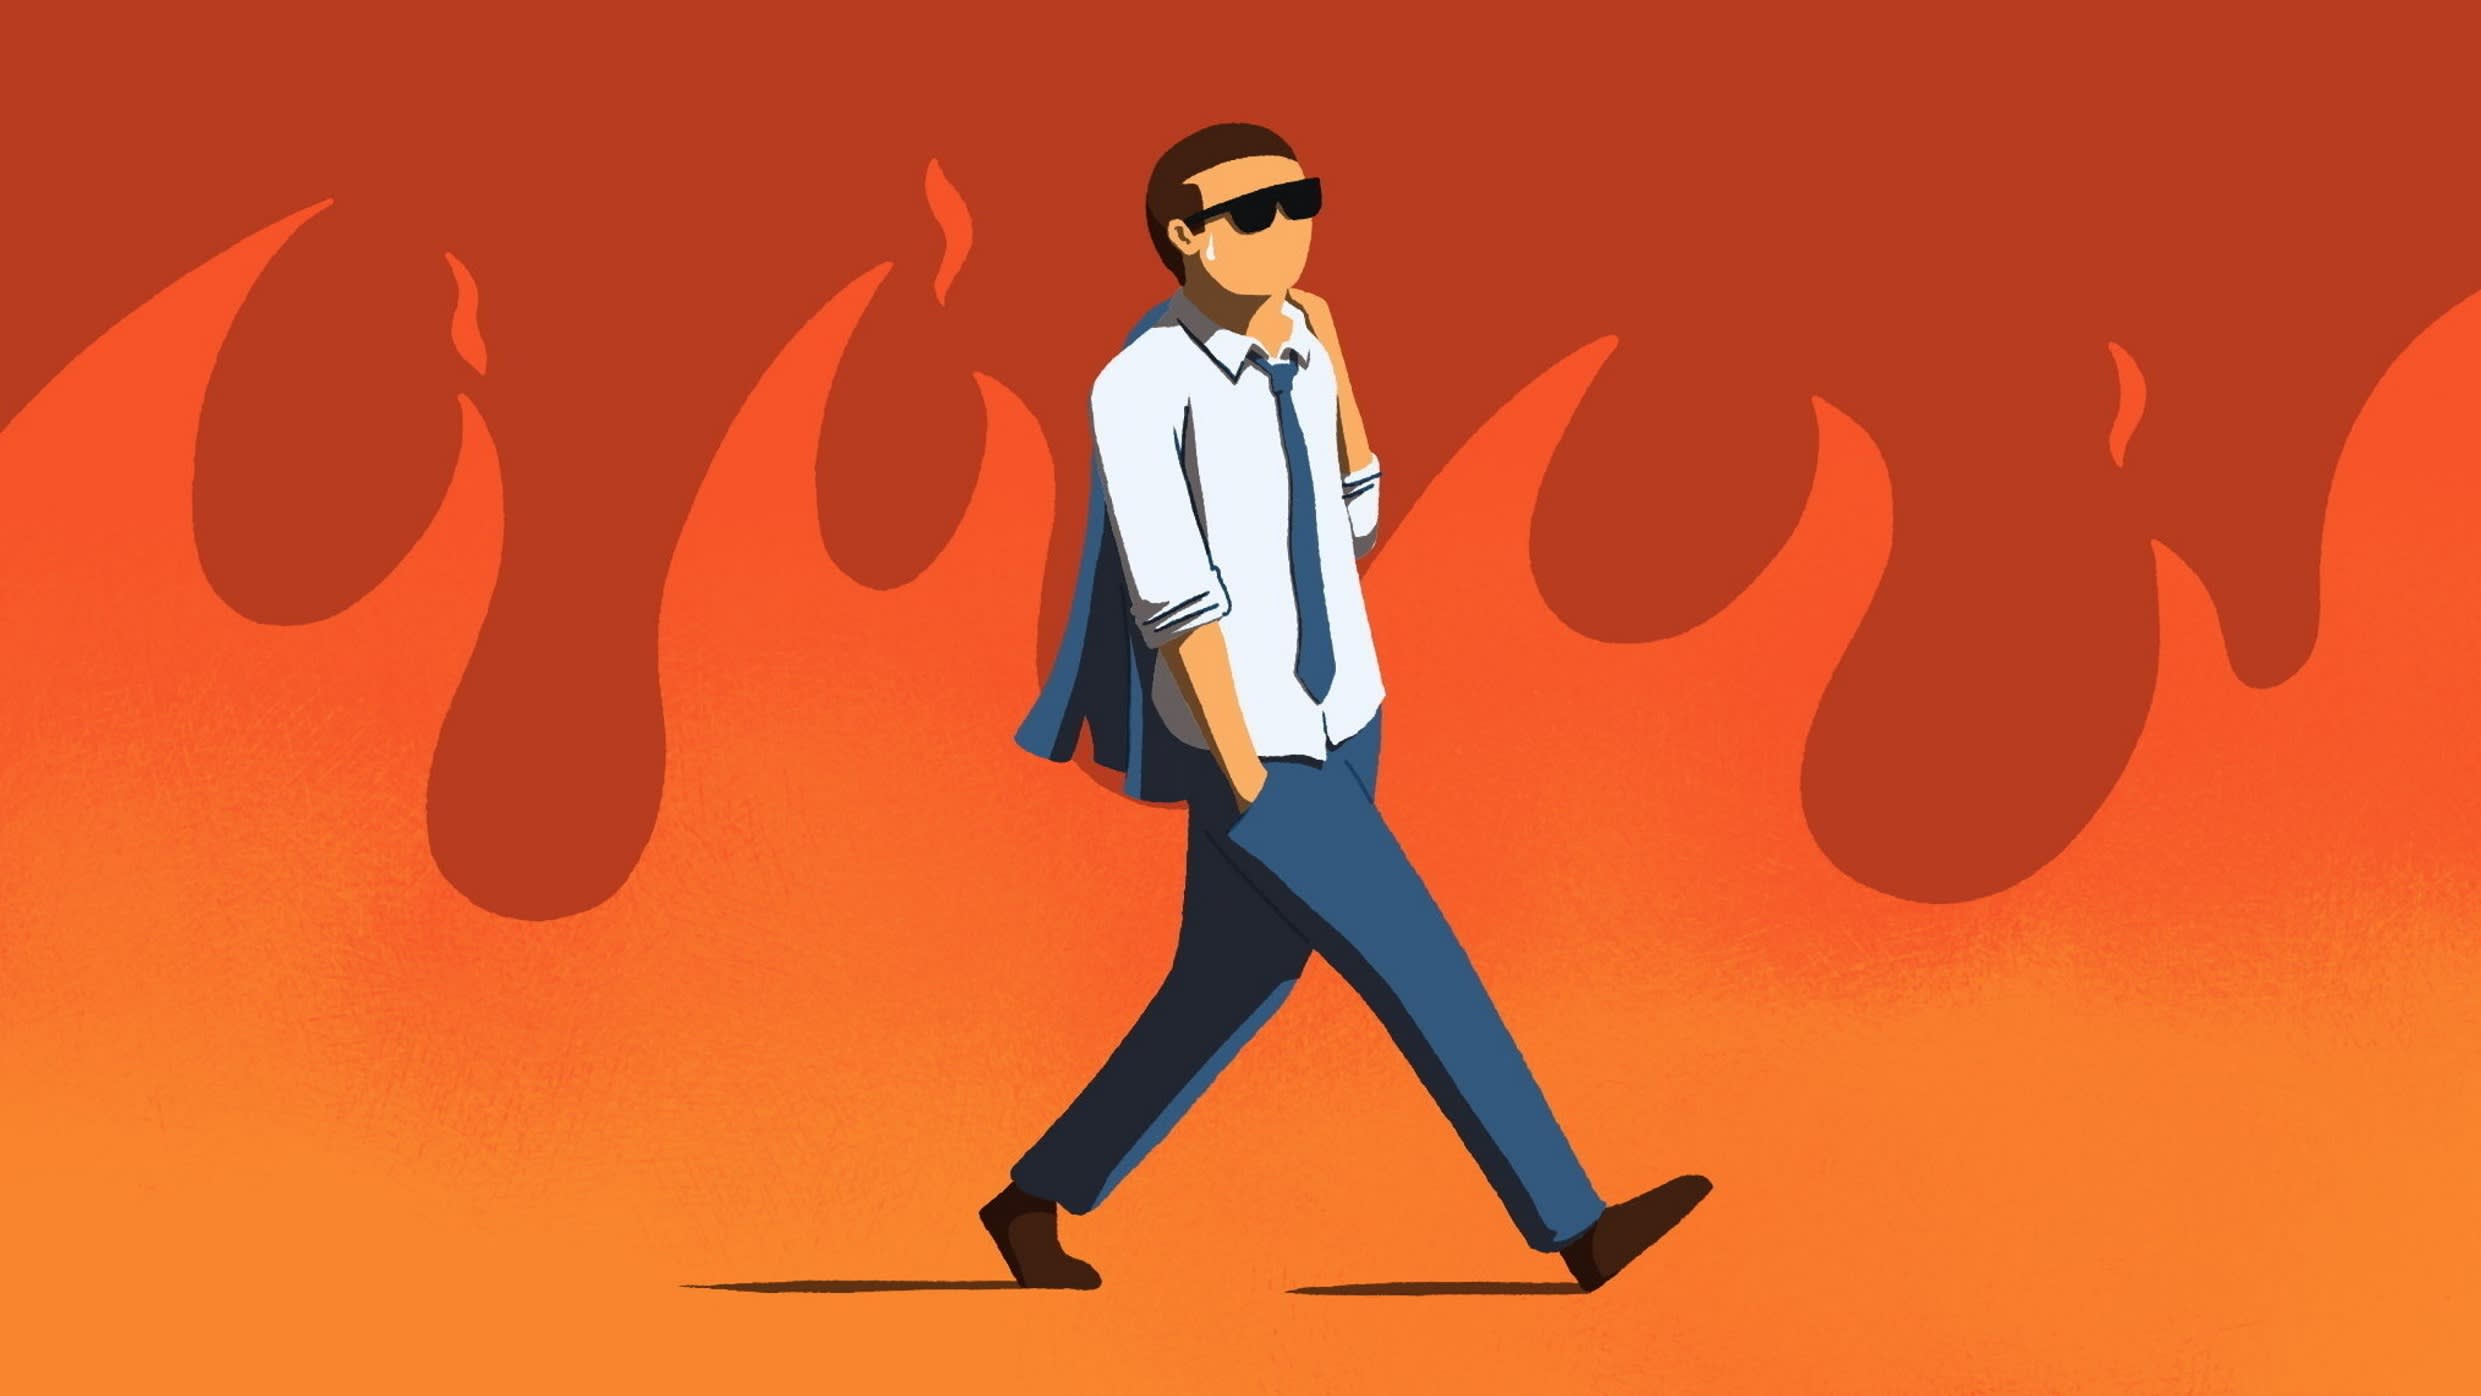 Andy Carter illustration of a man in a suit casually walking along while the world burns around him